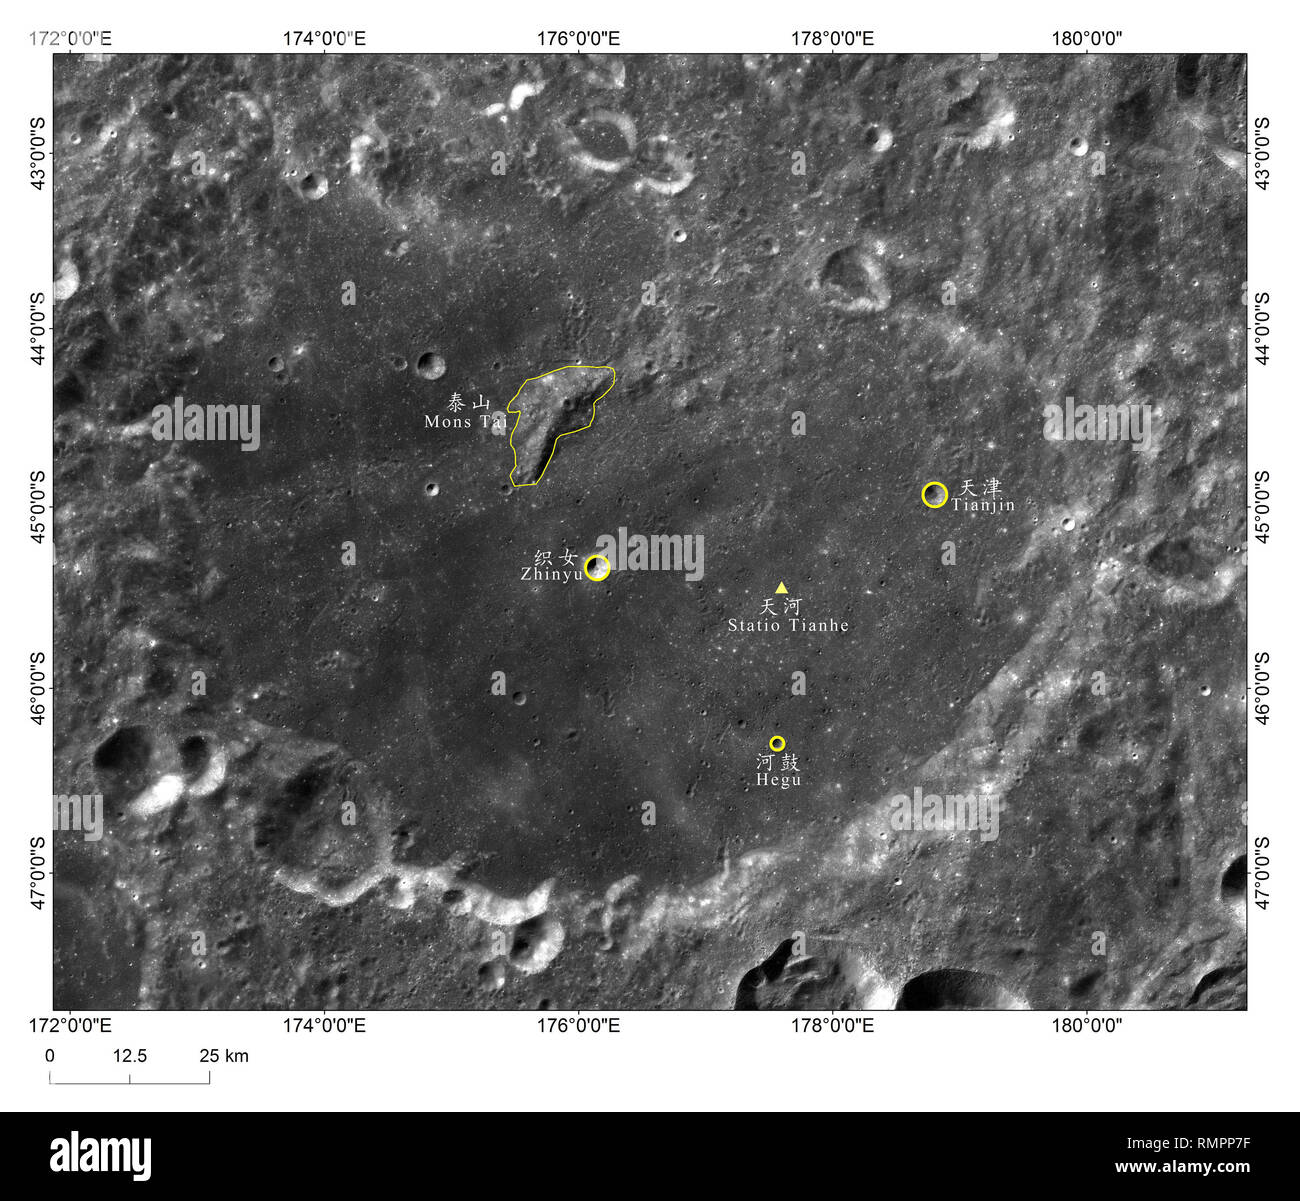 (190216) -- BEIJING, Feb. 16, 2019 (Xinhua) -- Photo provided by the China National Space Administration (CNSA) shows the image of the landing site of China's Chang'e-4 lunar probe, 'Statio Tianhe', surrounded by three nearby impact craters and one hill. The landing site of China's Chang'e-4 lunar probe has been named 'Statio Tianhe' after the spacecraft made the first-ever soft landing on the far side of the moon last month. Together with three nearby impact craters and one hill, the name was approved by the International Astronomical Union (IAU), Liu Jizhong, director of the China Lunar Stock Photo